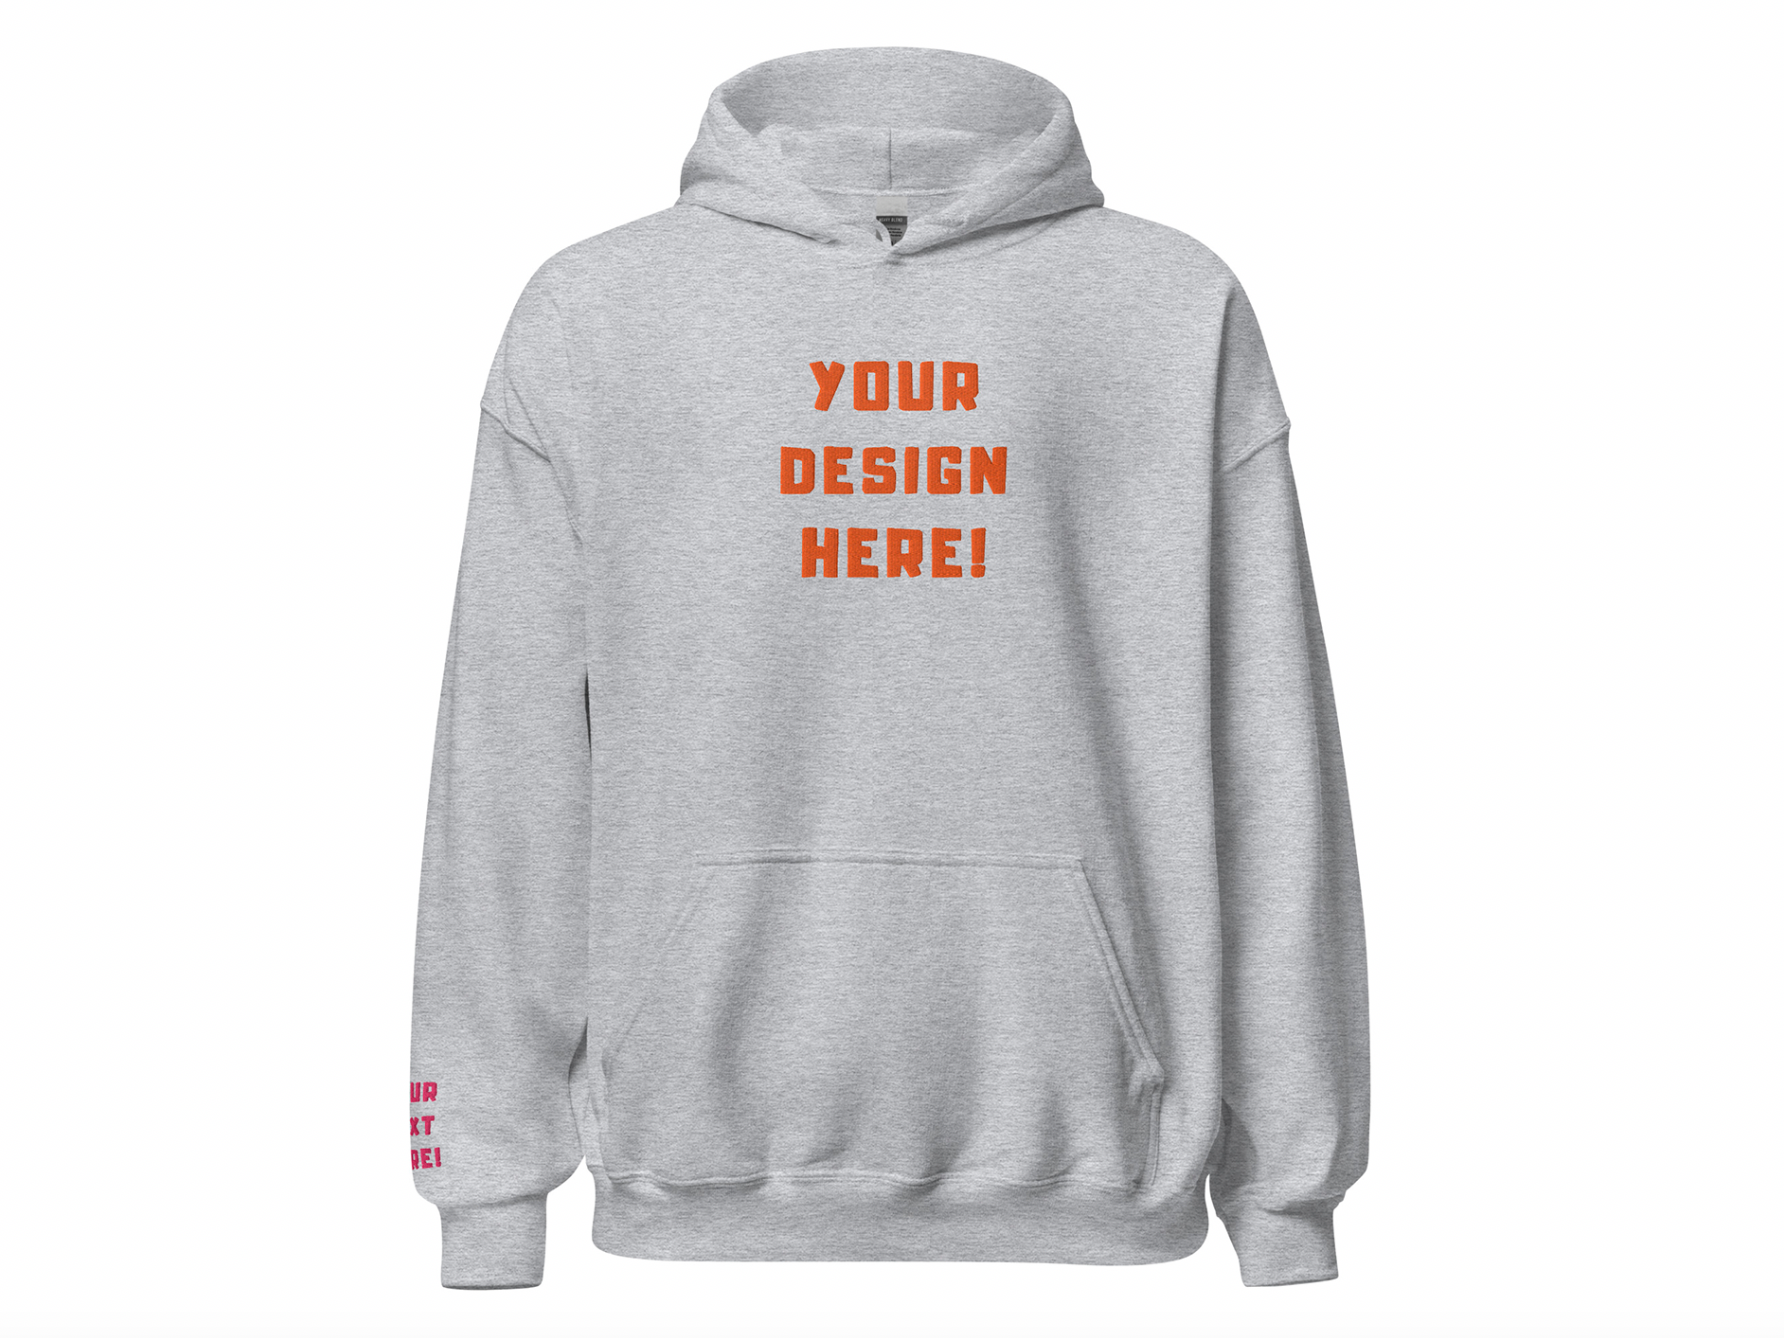 Custom adults embroidered sport grey hoodie. Sleeve text is customizable. 